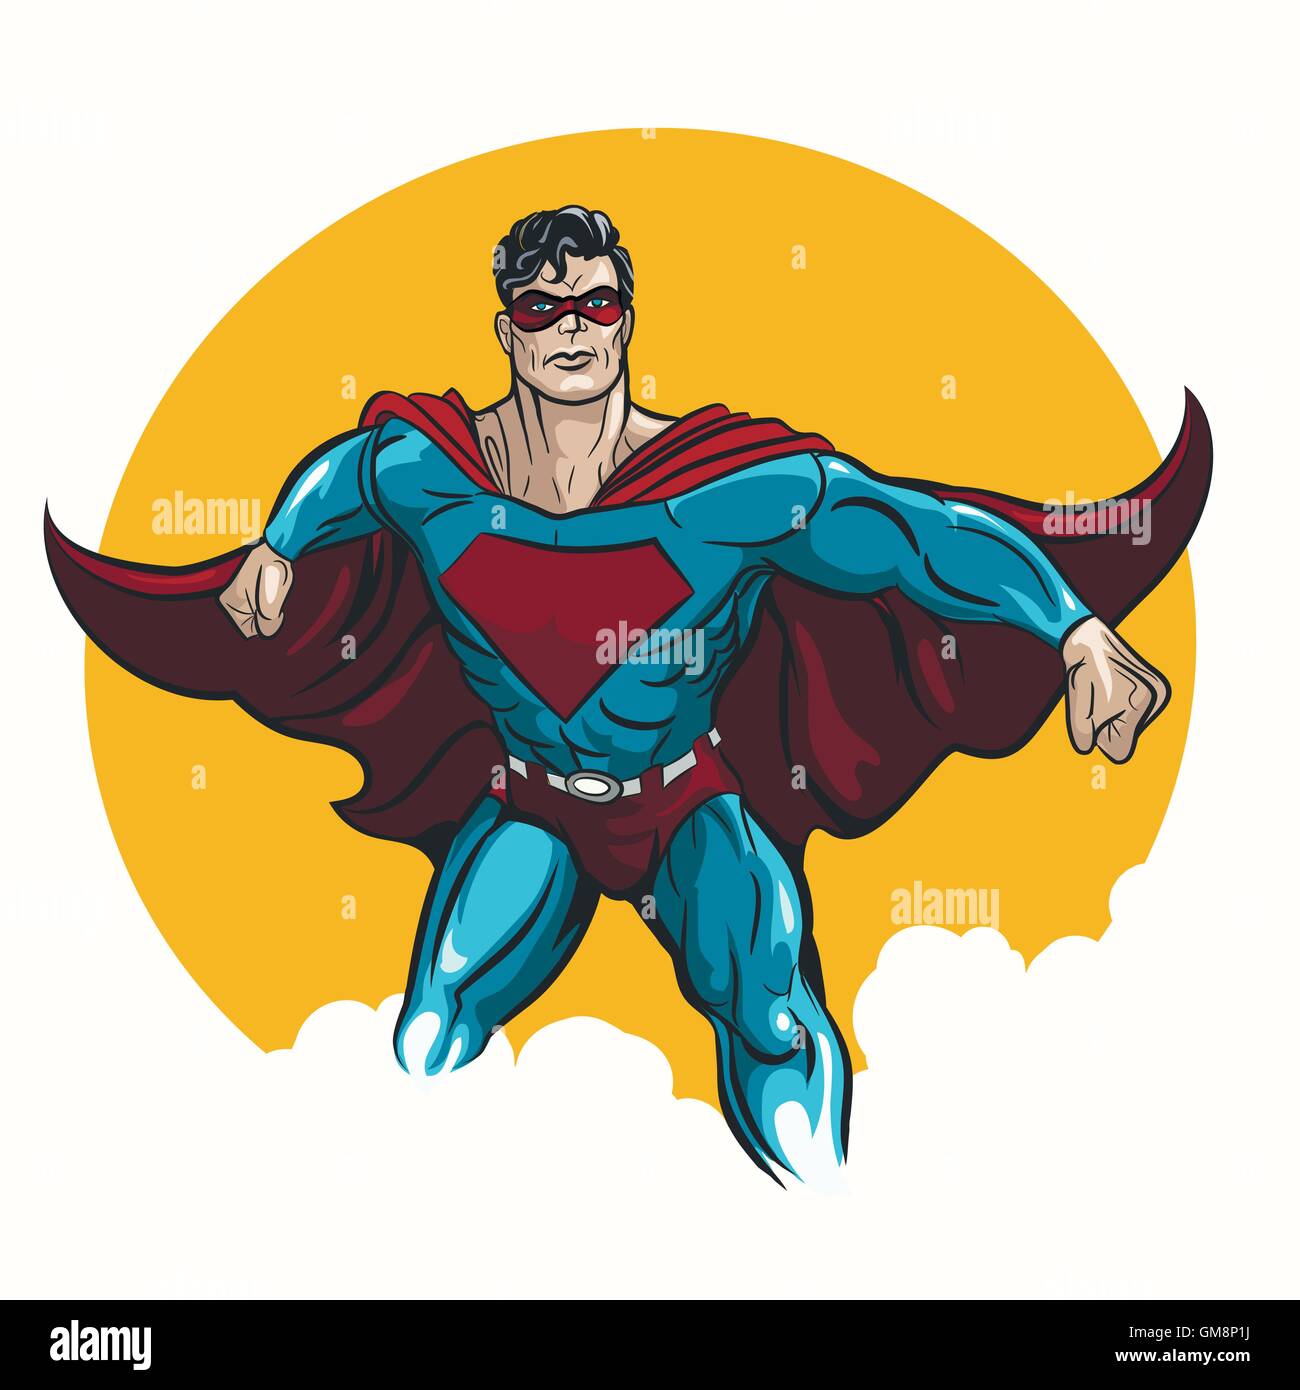 Superhero standing with cape waving in the wind. Illustration in comic book style. Stock Vector